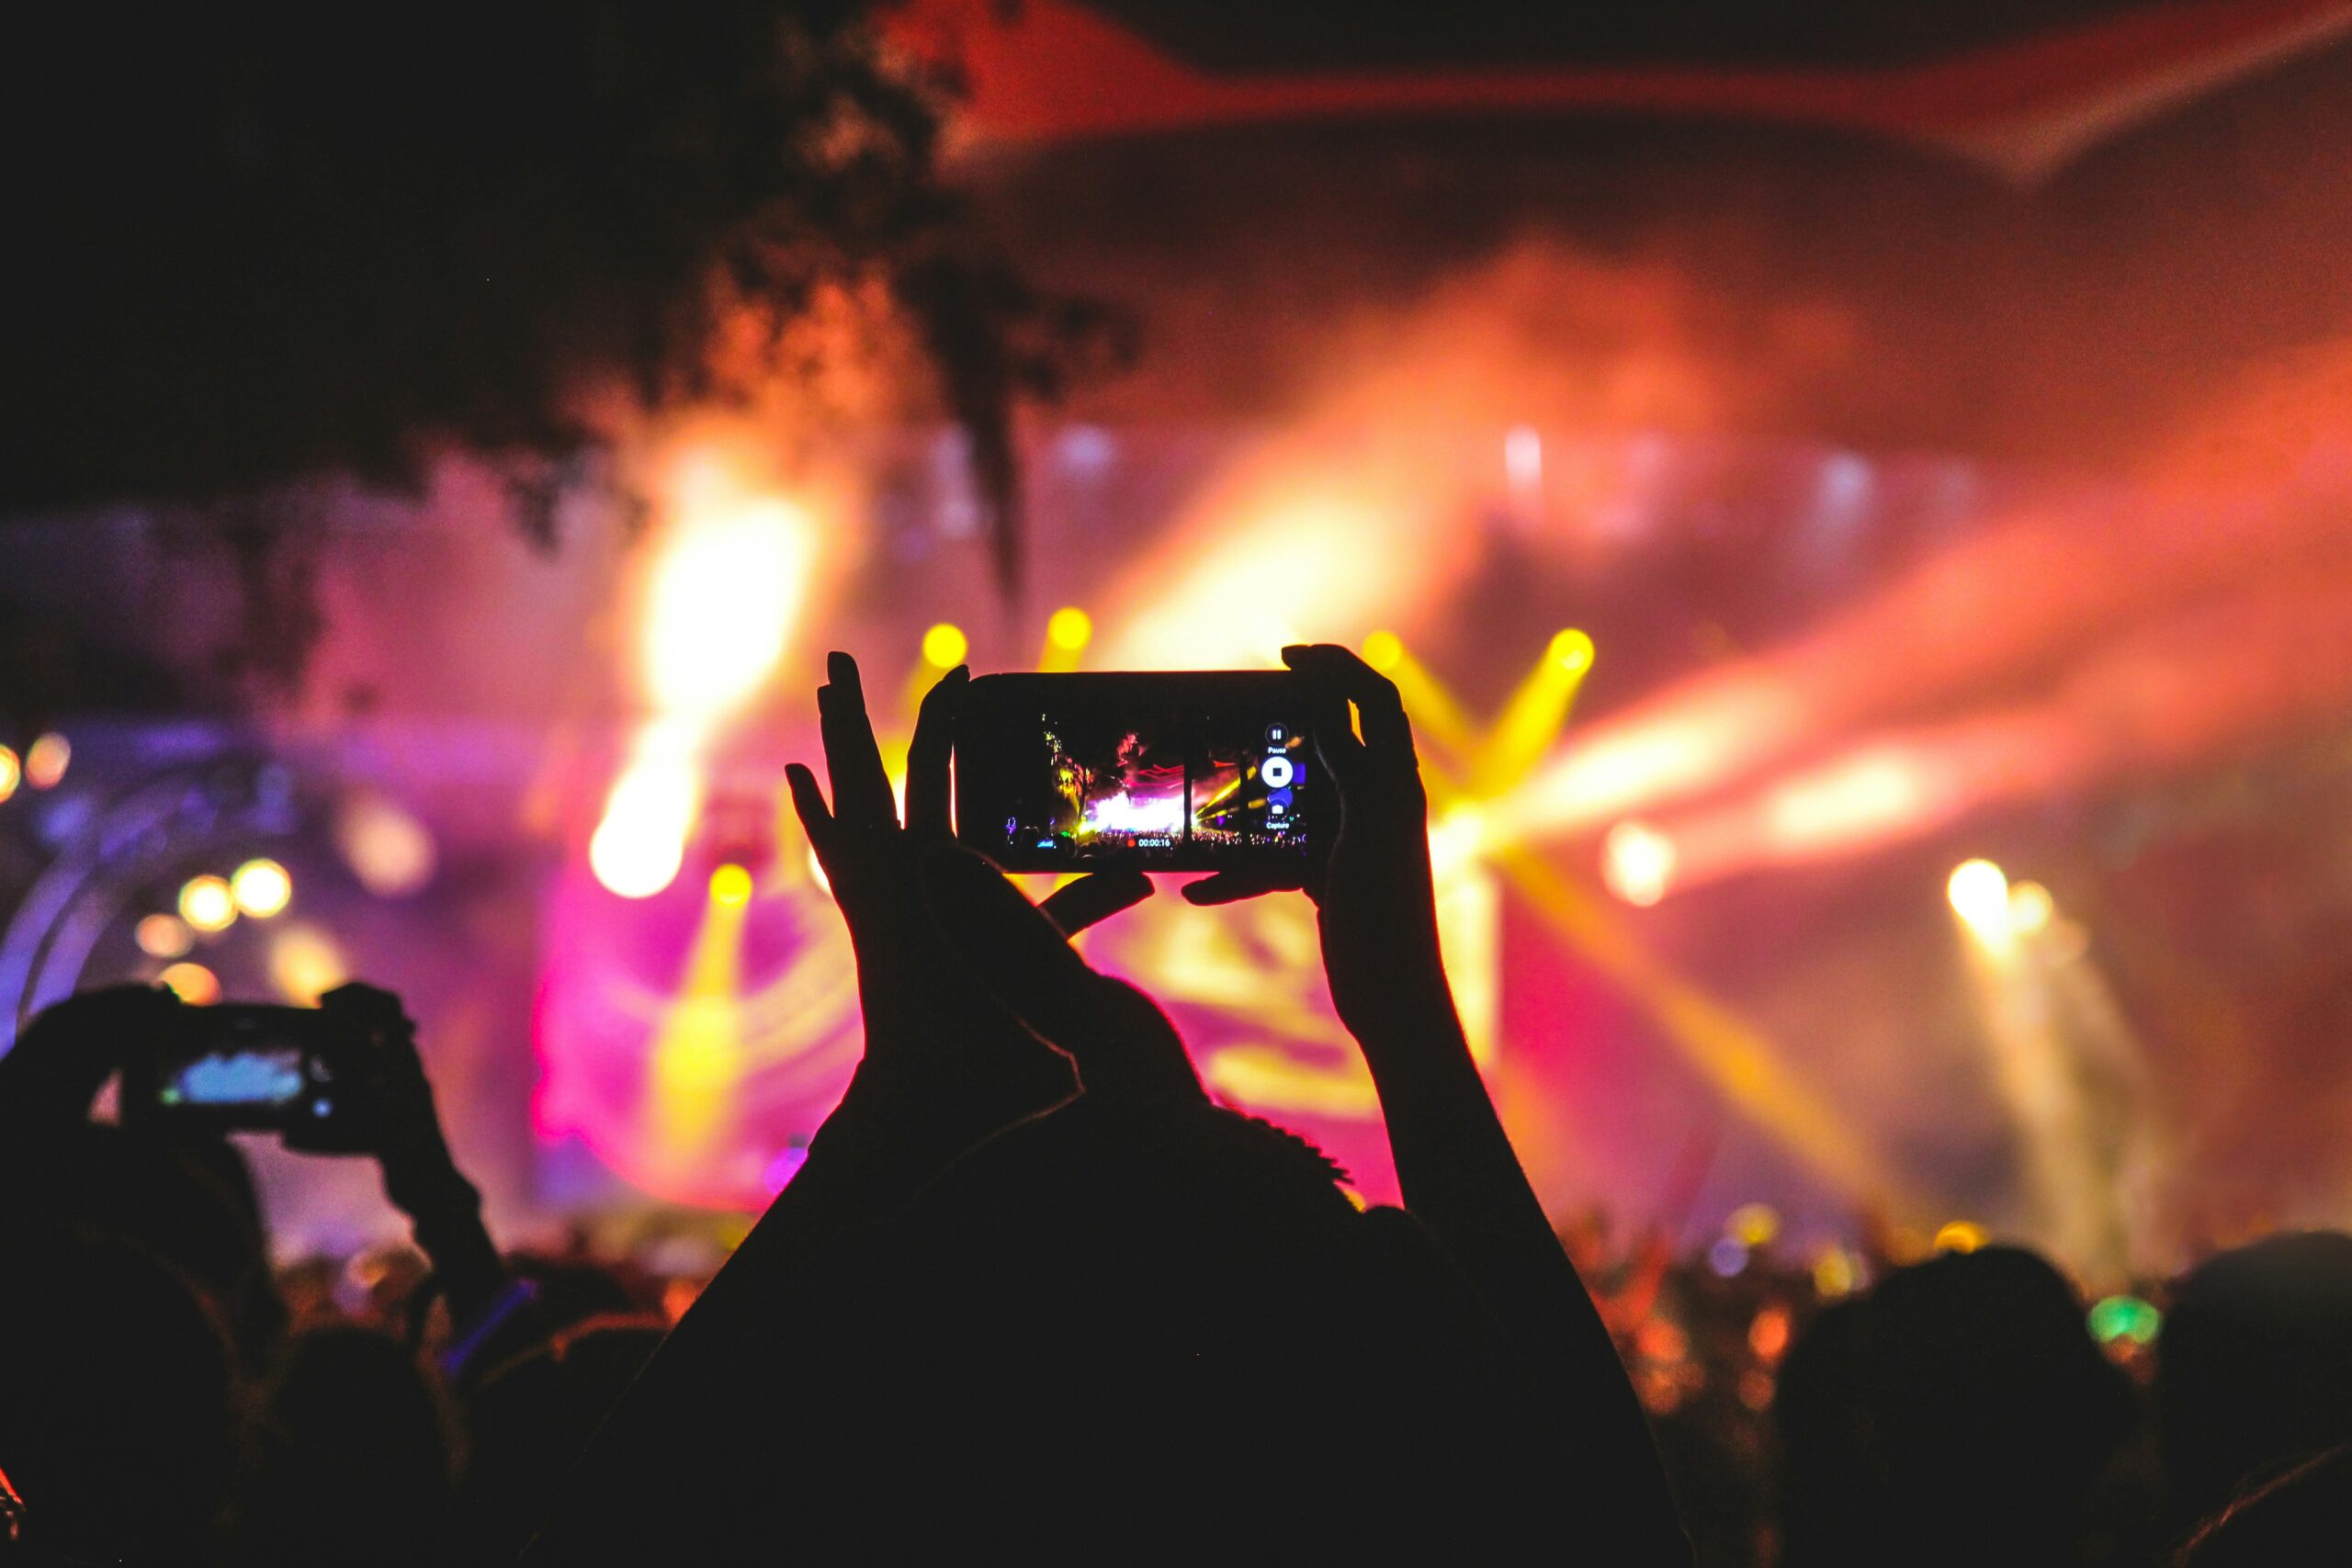 Concert goer capturing a video of an artist performing at a concert.